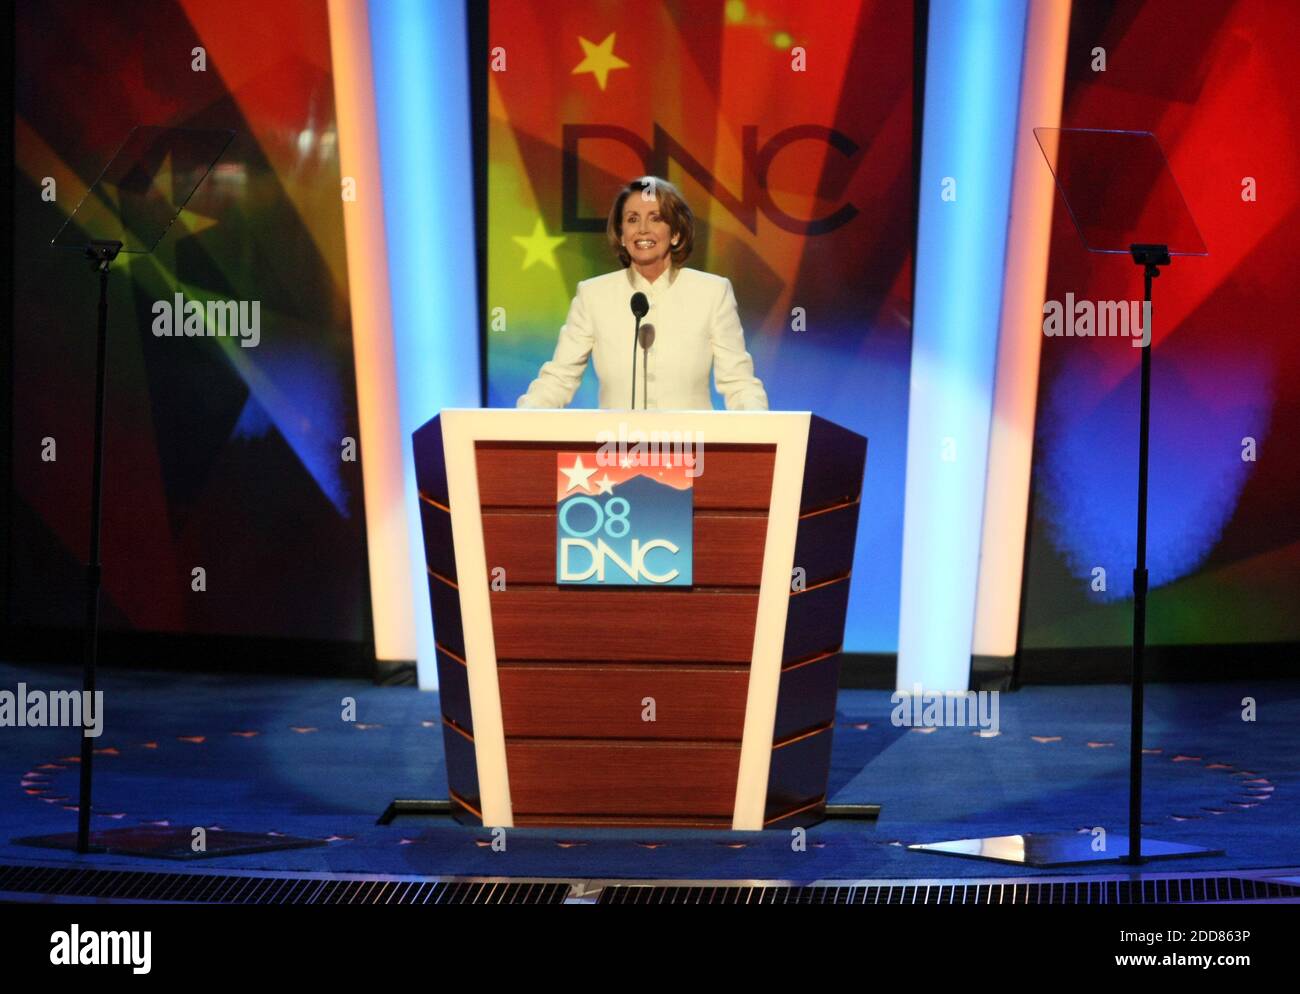 NO FILM, NO VIDEO, NO TV, NO DOCUMENTARY - Speaker of the U.S. House of Representatives and Permanent Chair of the 2008 Democratic Convention Nancy Pelosi speaks at the party's national convention in Denver, CO, USA on August 25, 2008. Photo by Brian Baer/Sacramento Bee/MCT/ABACAPRESS.COM Stock Photo